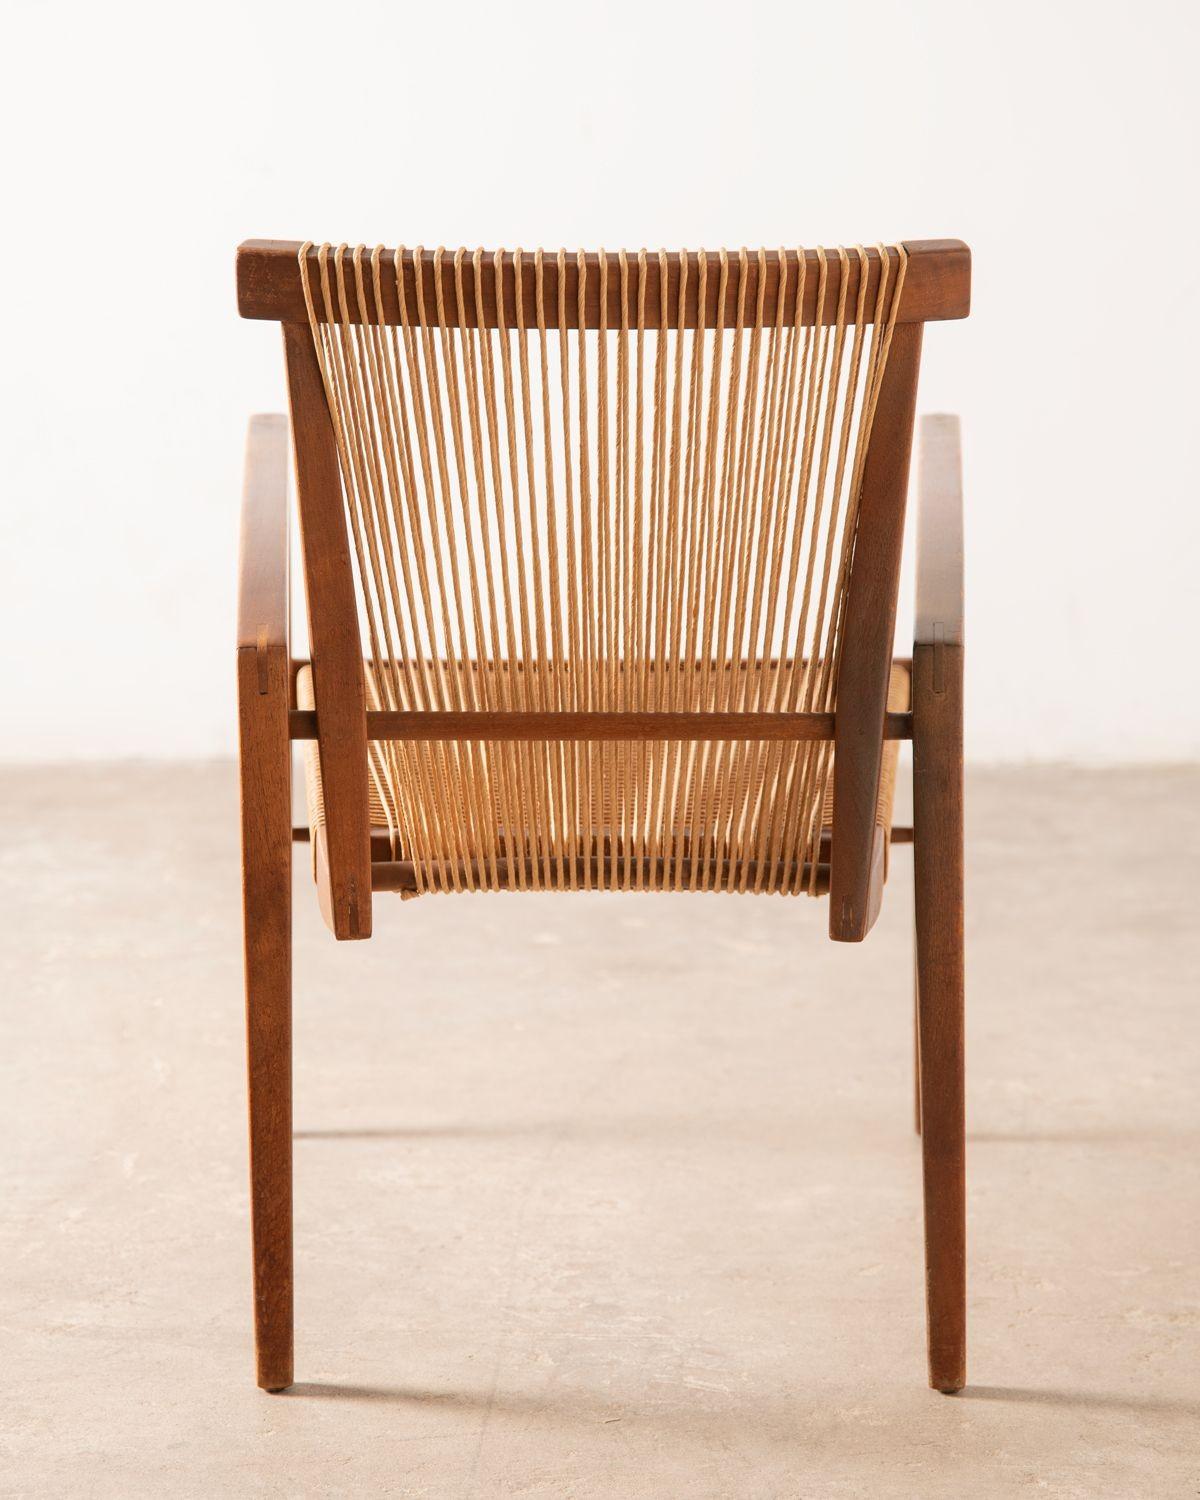 American Walnut Sculptural String Chair Crafted in the Irving Sabo Studio for JGFurniture For Sale